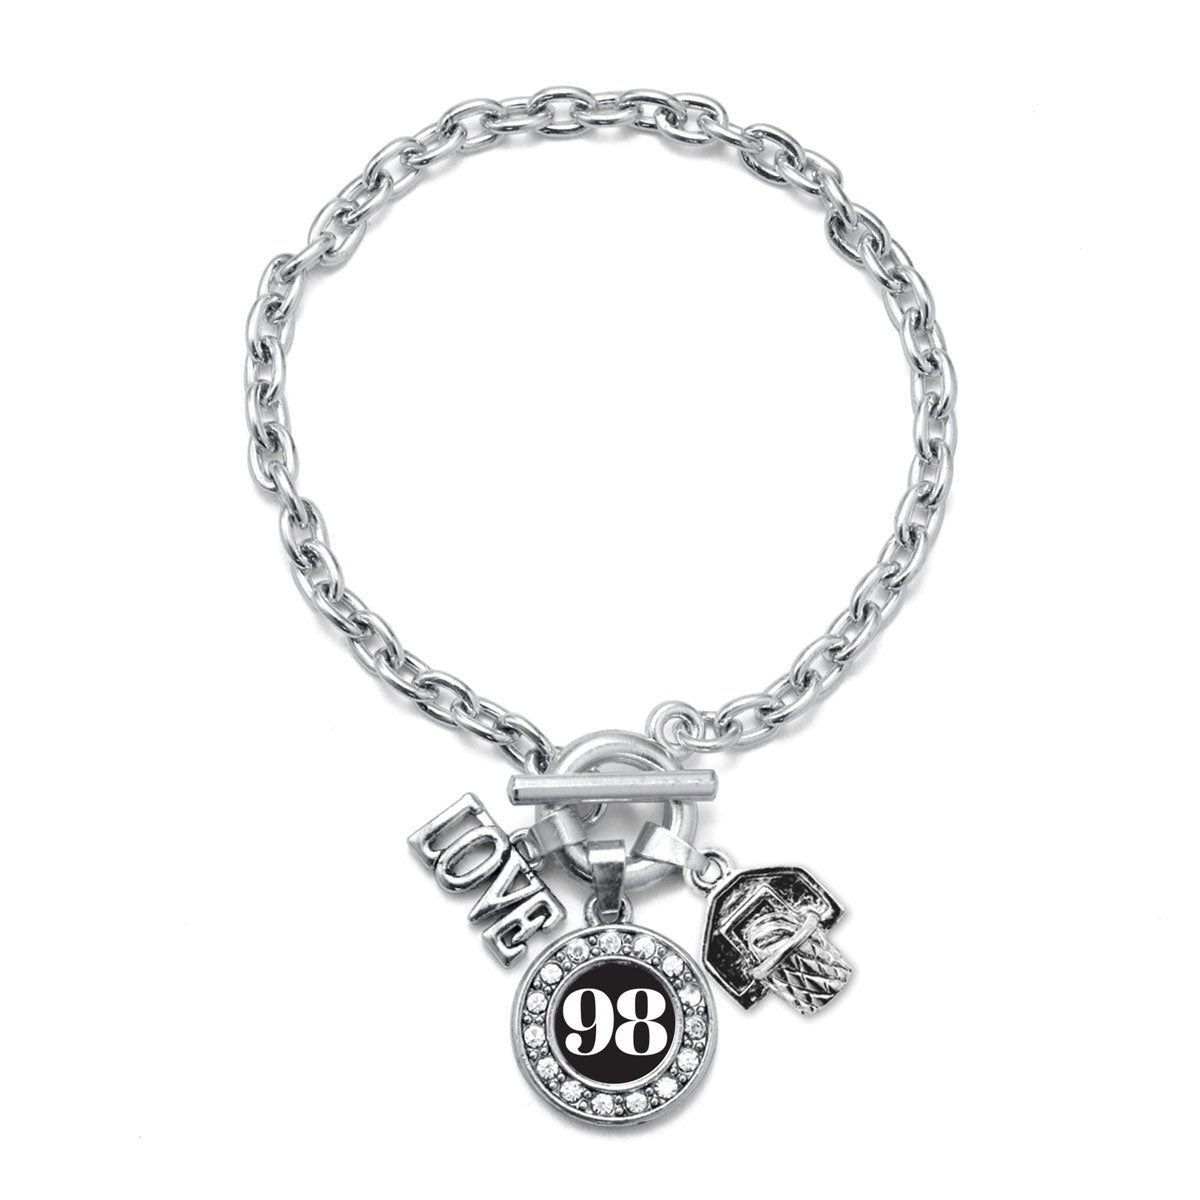 Silver Basketball Hoop - Sports Number 98 Circle Charm Toggle Bracelet